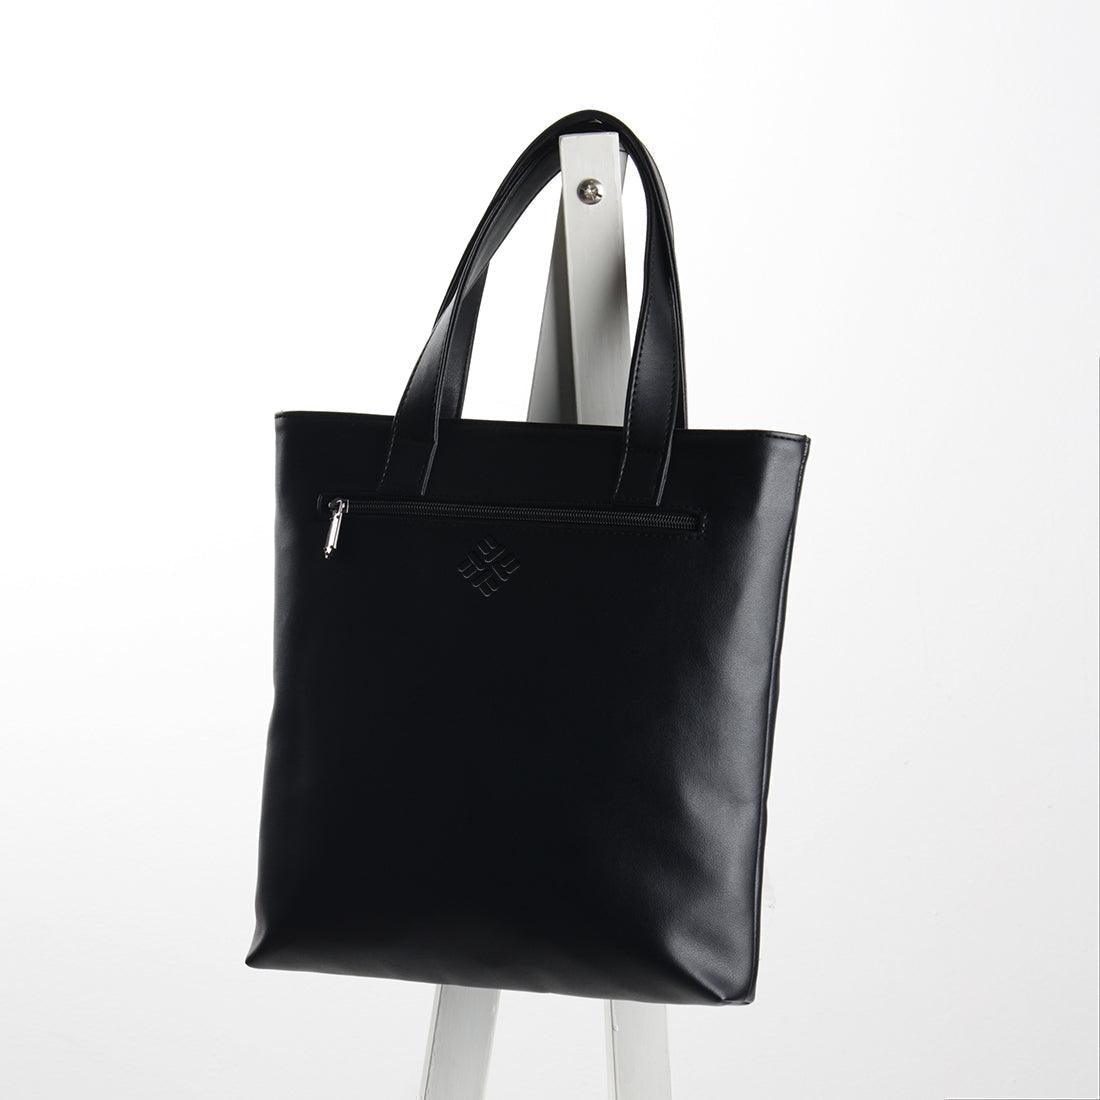 Leather Tote bag Give me some space